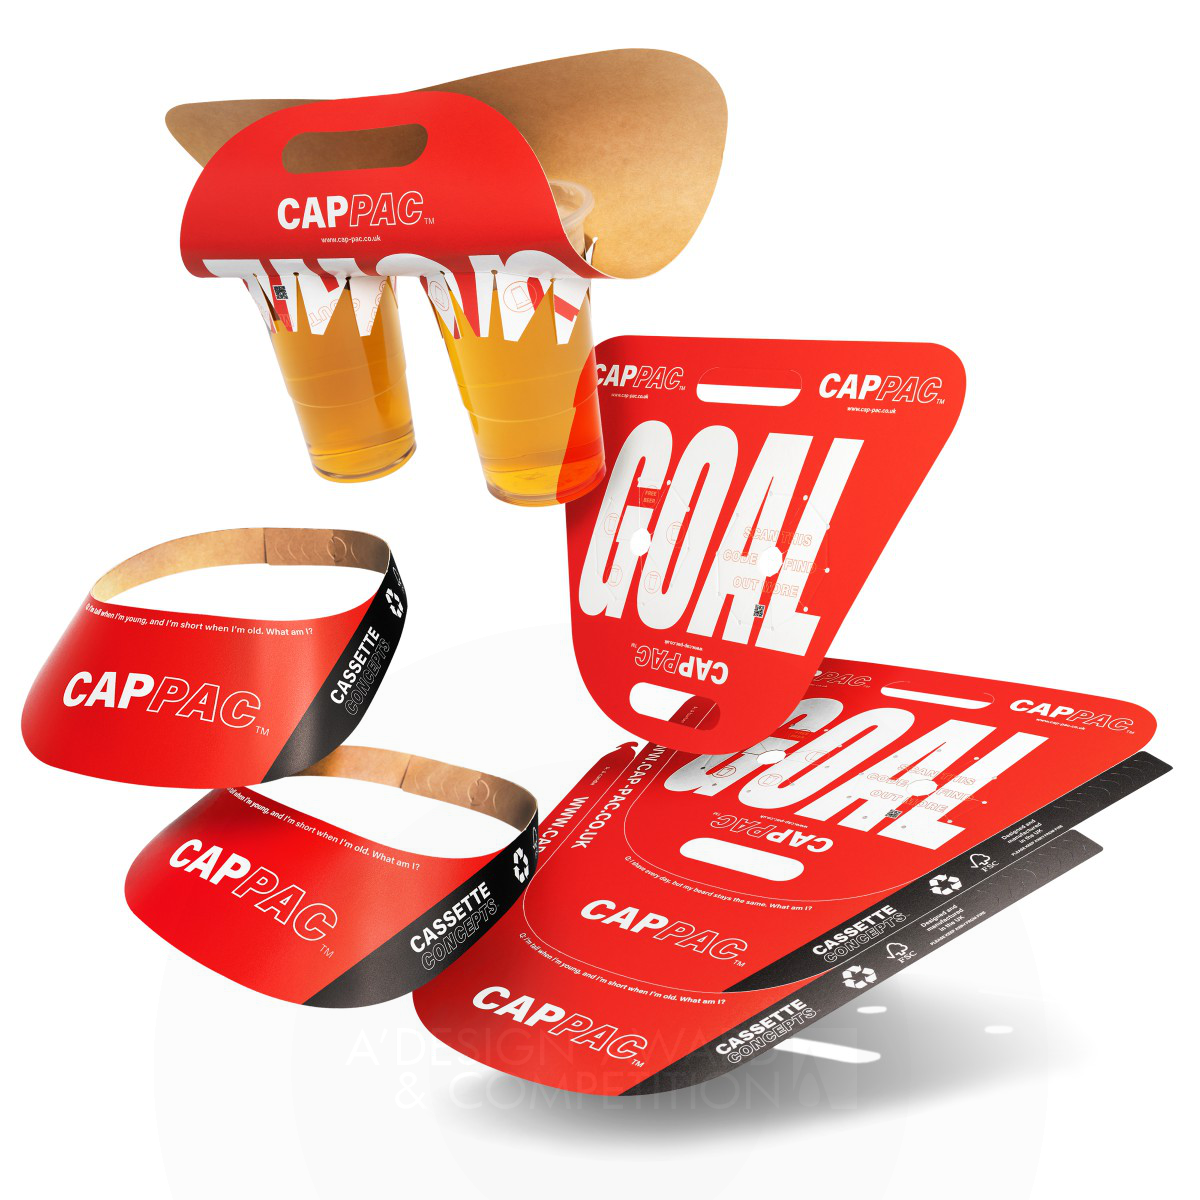 Cap Pac Events Promotional Product by Joshua Grant Rayner